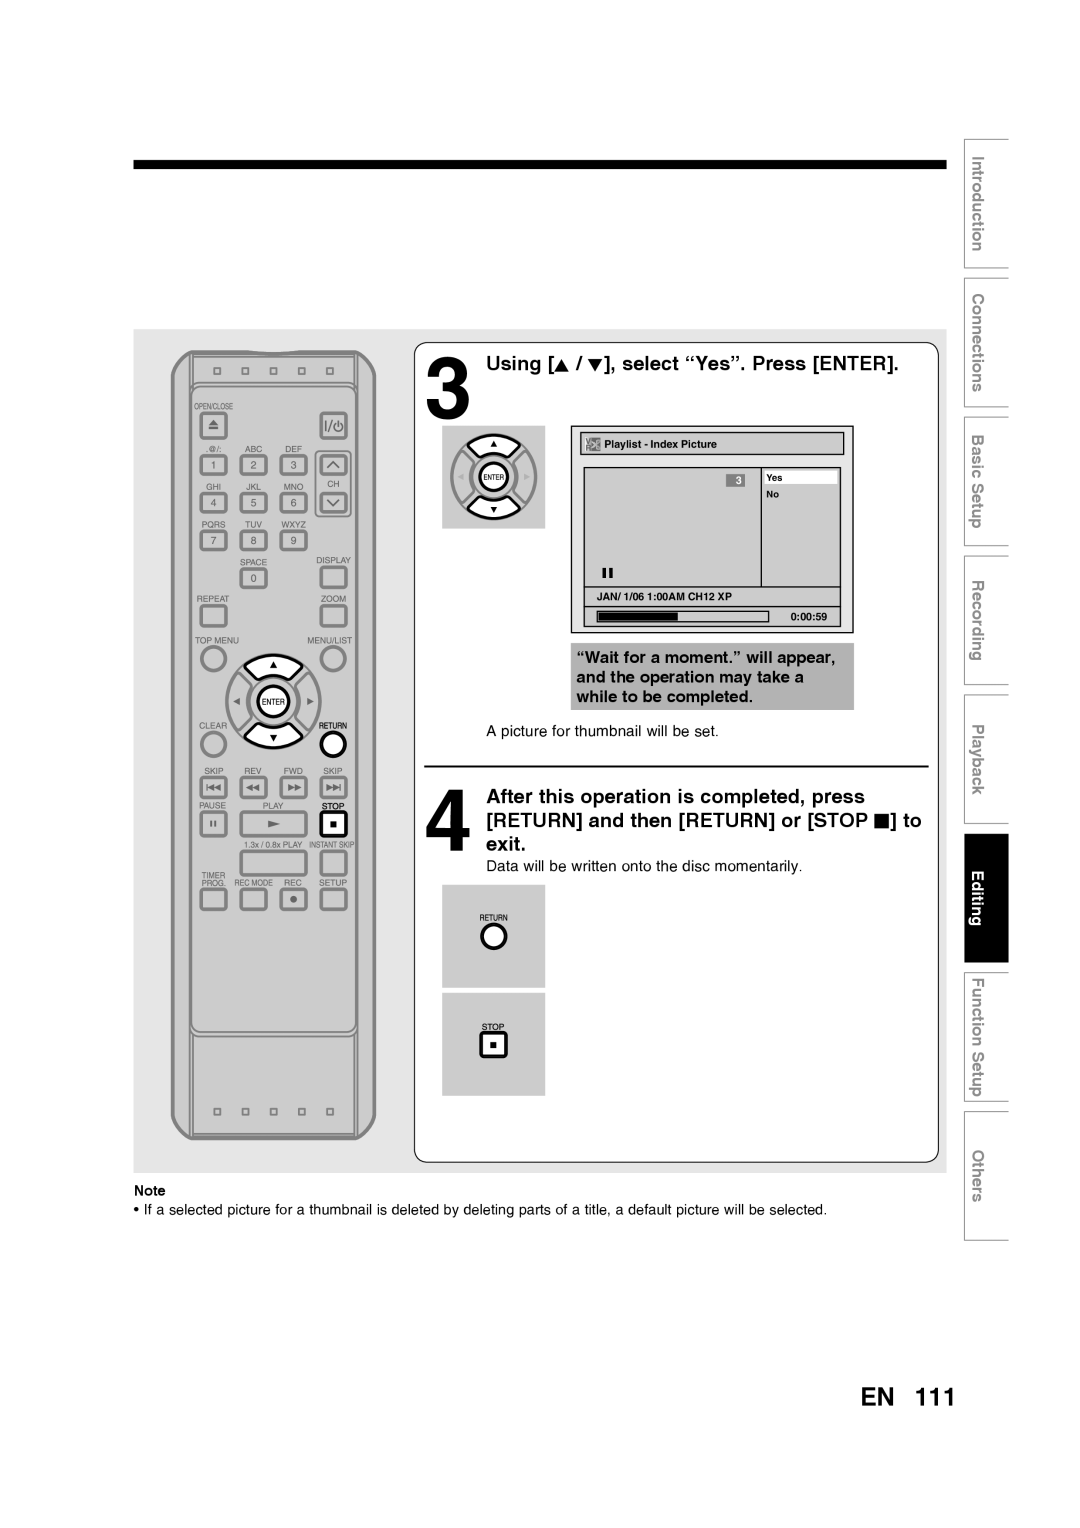 Toshiba D-RW2SU/D-RW2SC Using K / L, select “Yes”. Press ENTER, Editing Function Setup Others, Playlist - Index Picture 